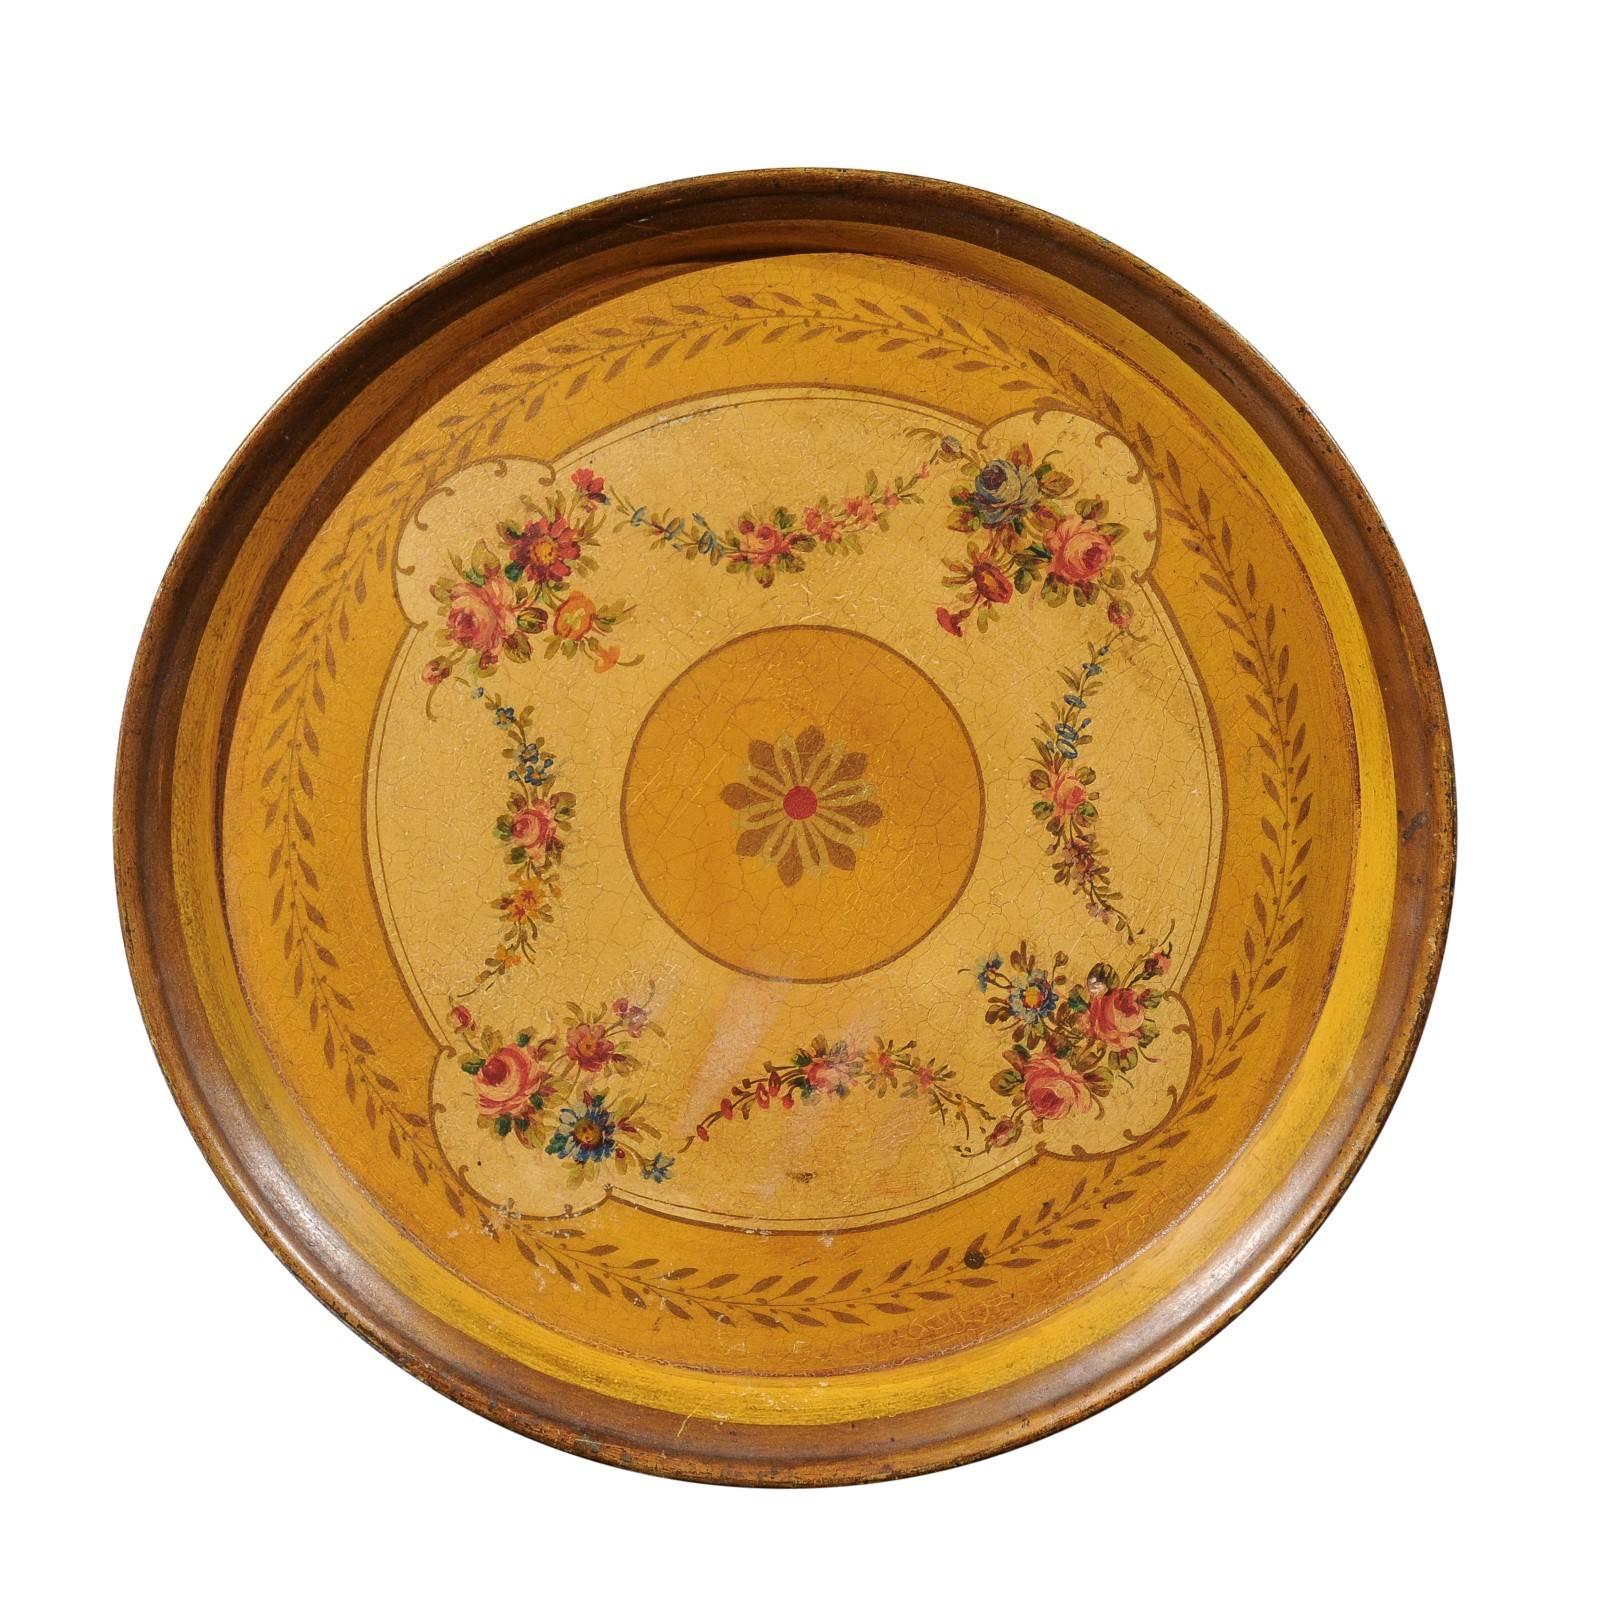 French Circular Painted Tole Tray with Floral Motifs from the 19th Century